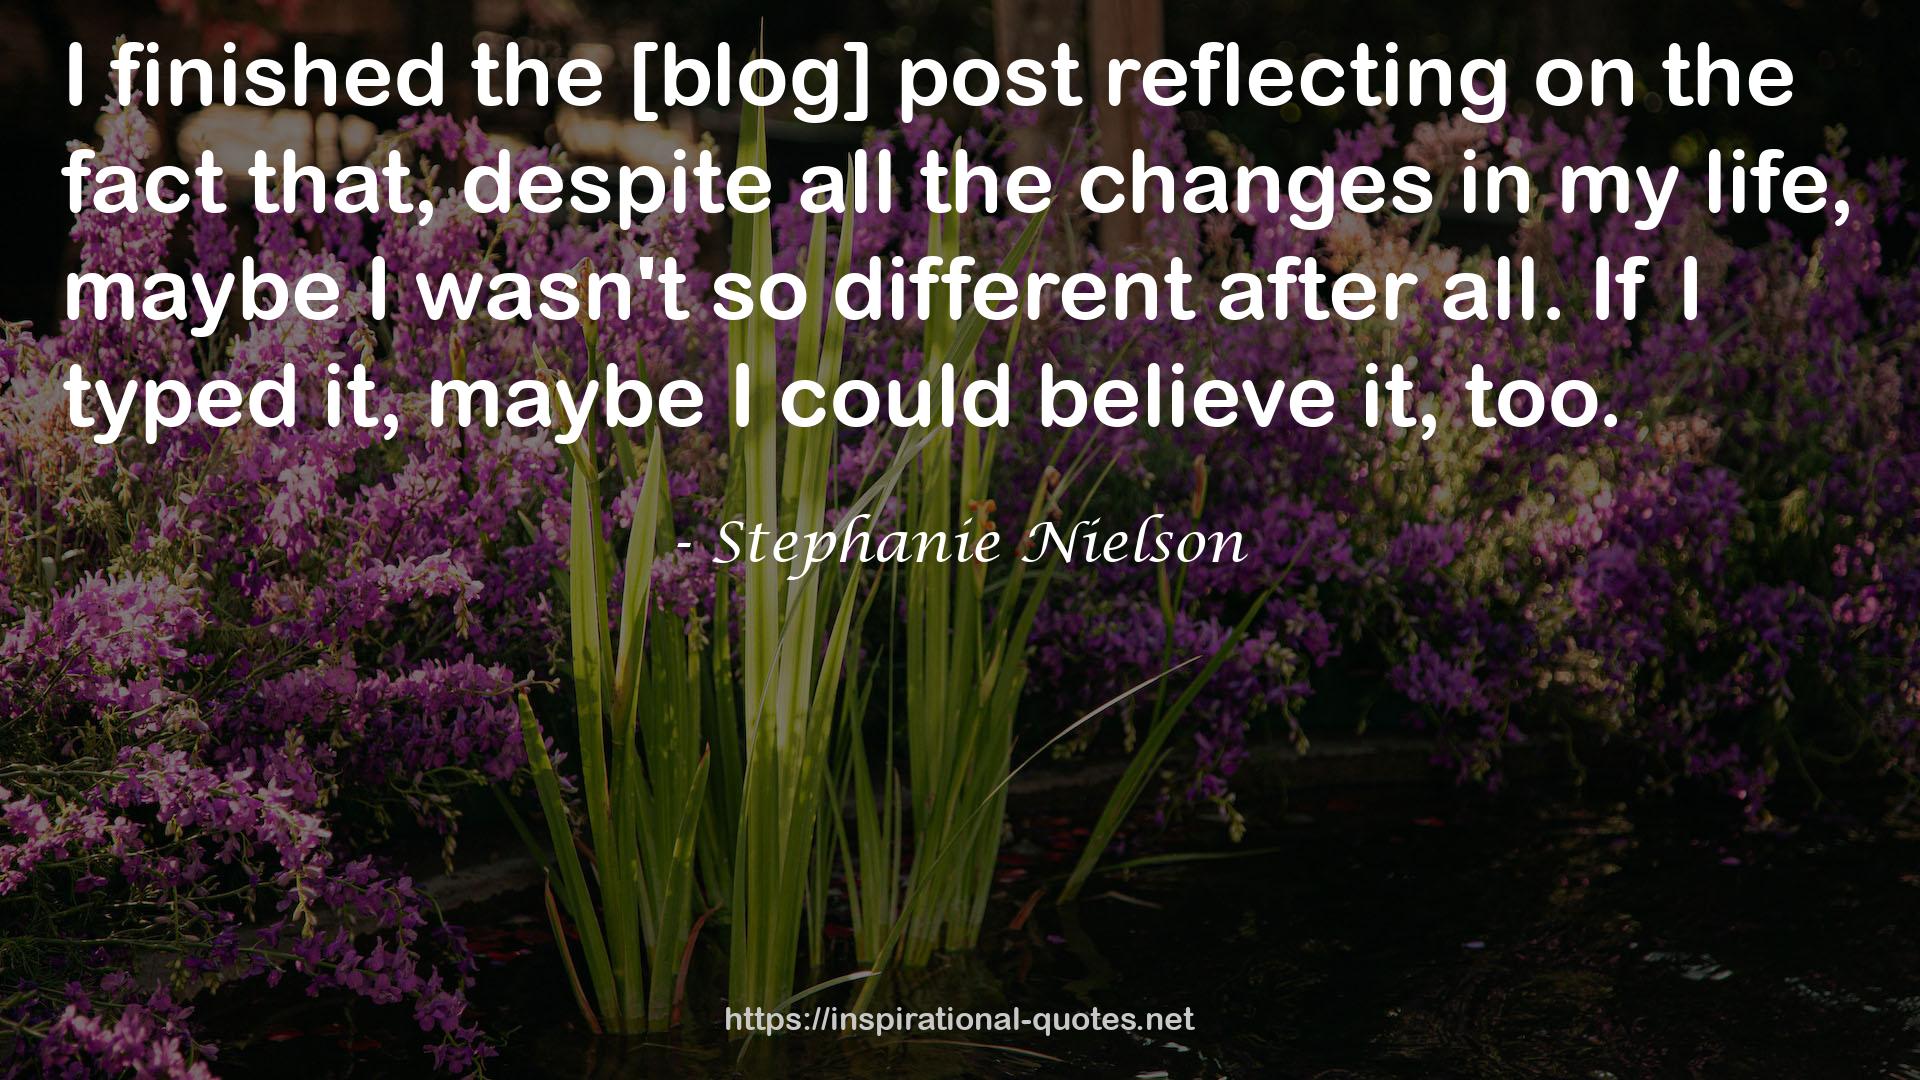 Stephanie Nielson QUOTES